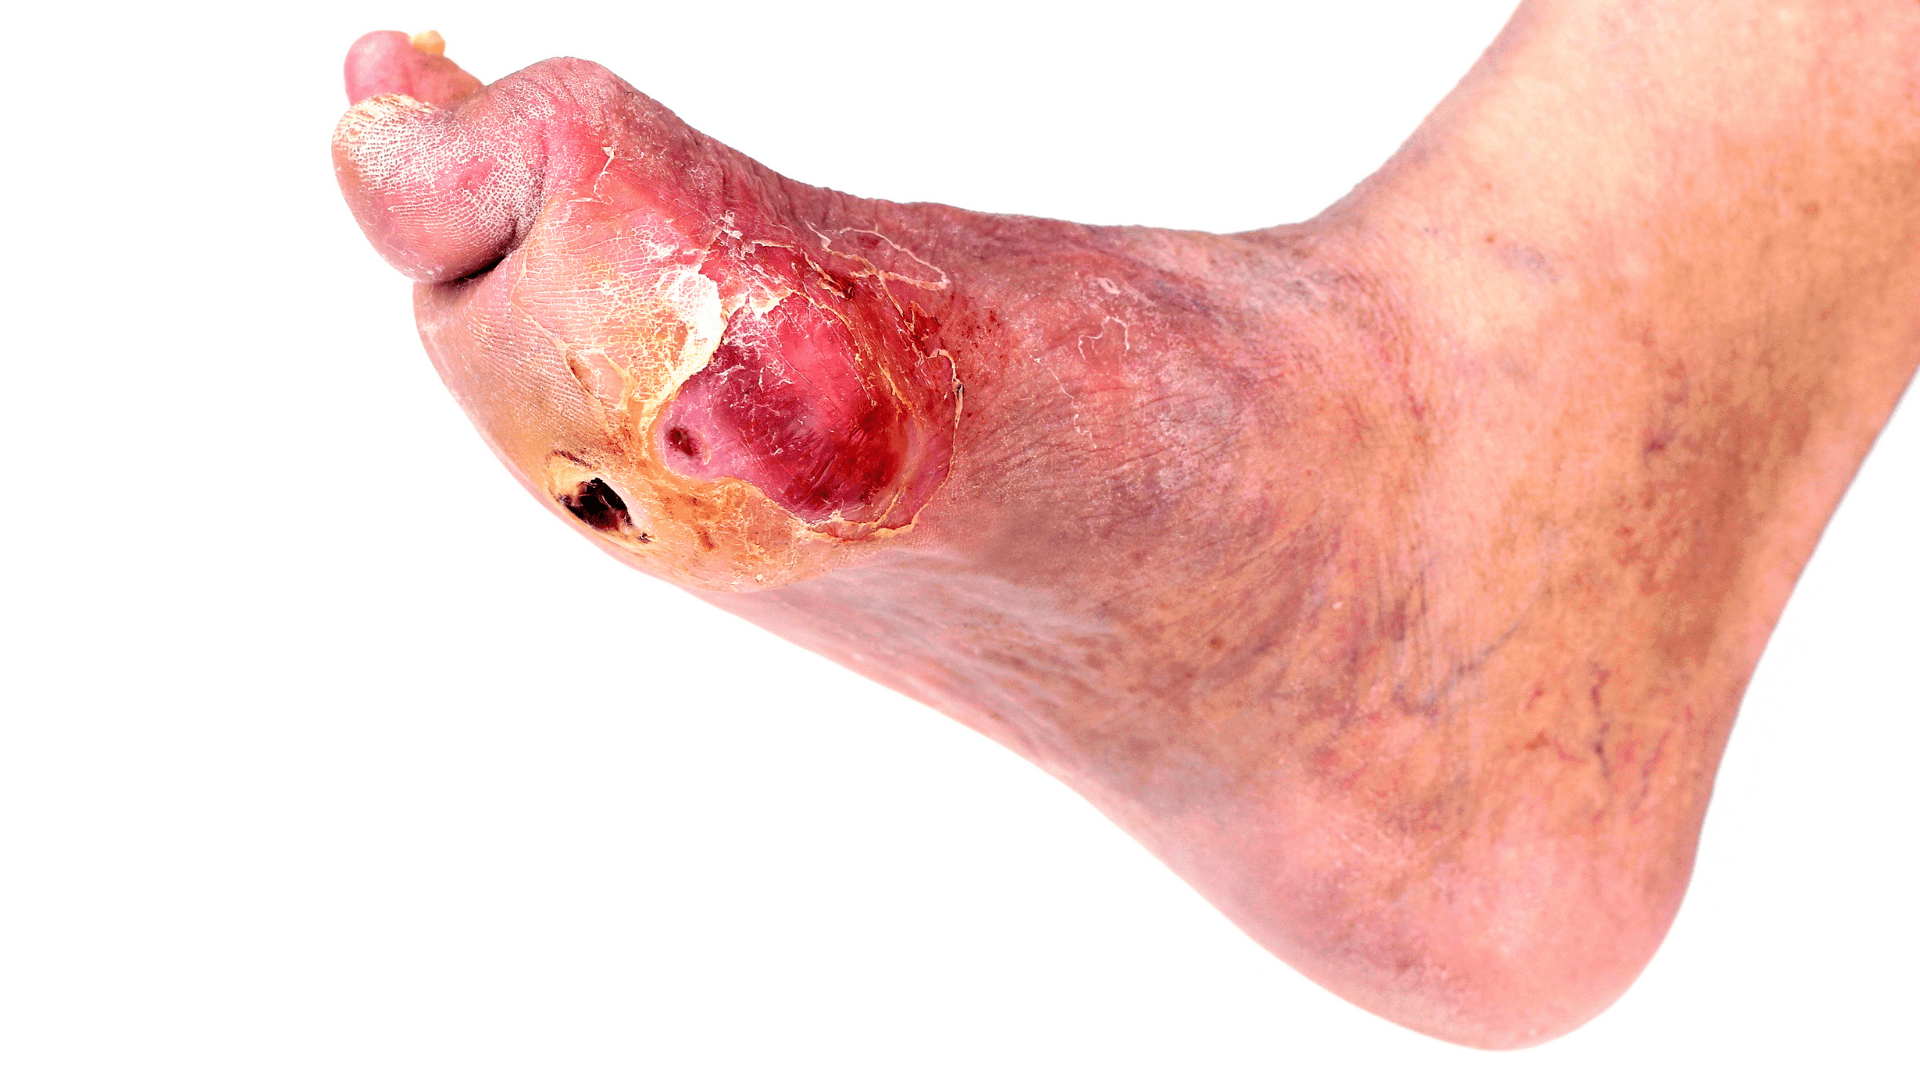 Wounded Foot